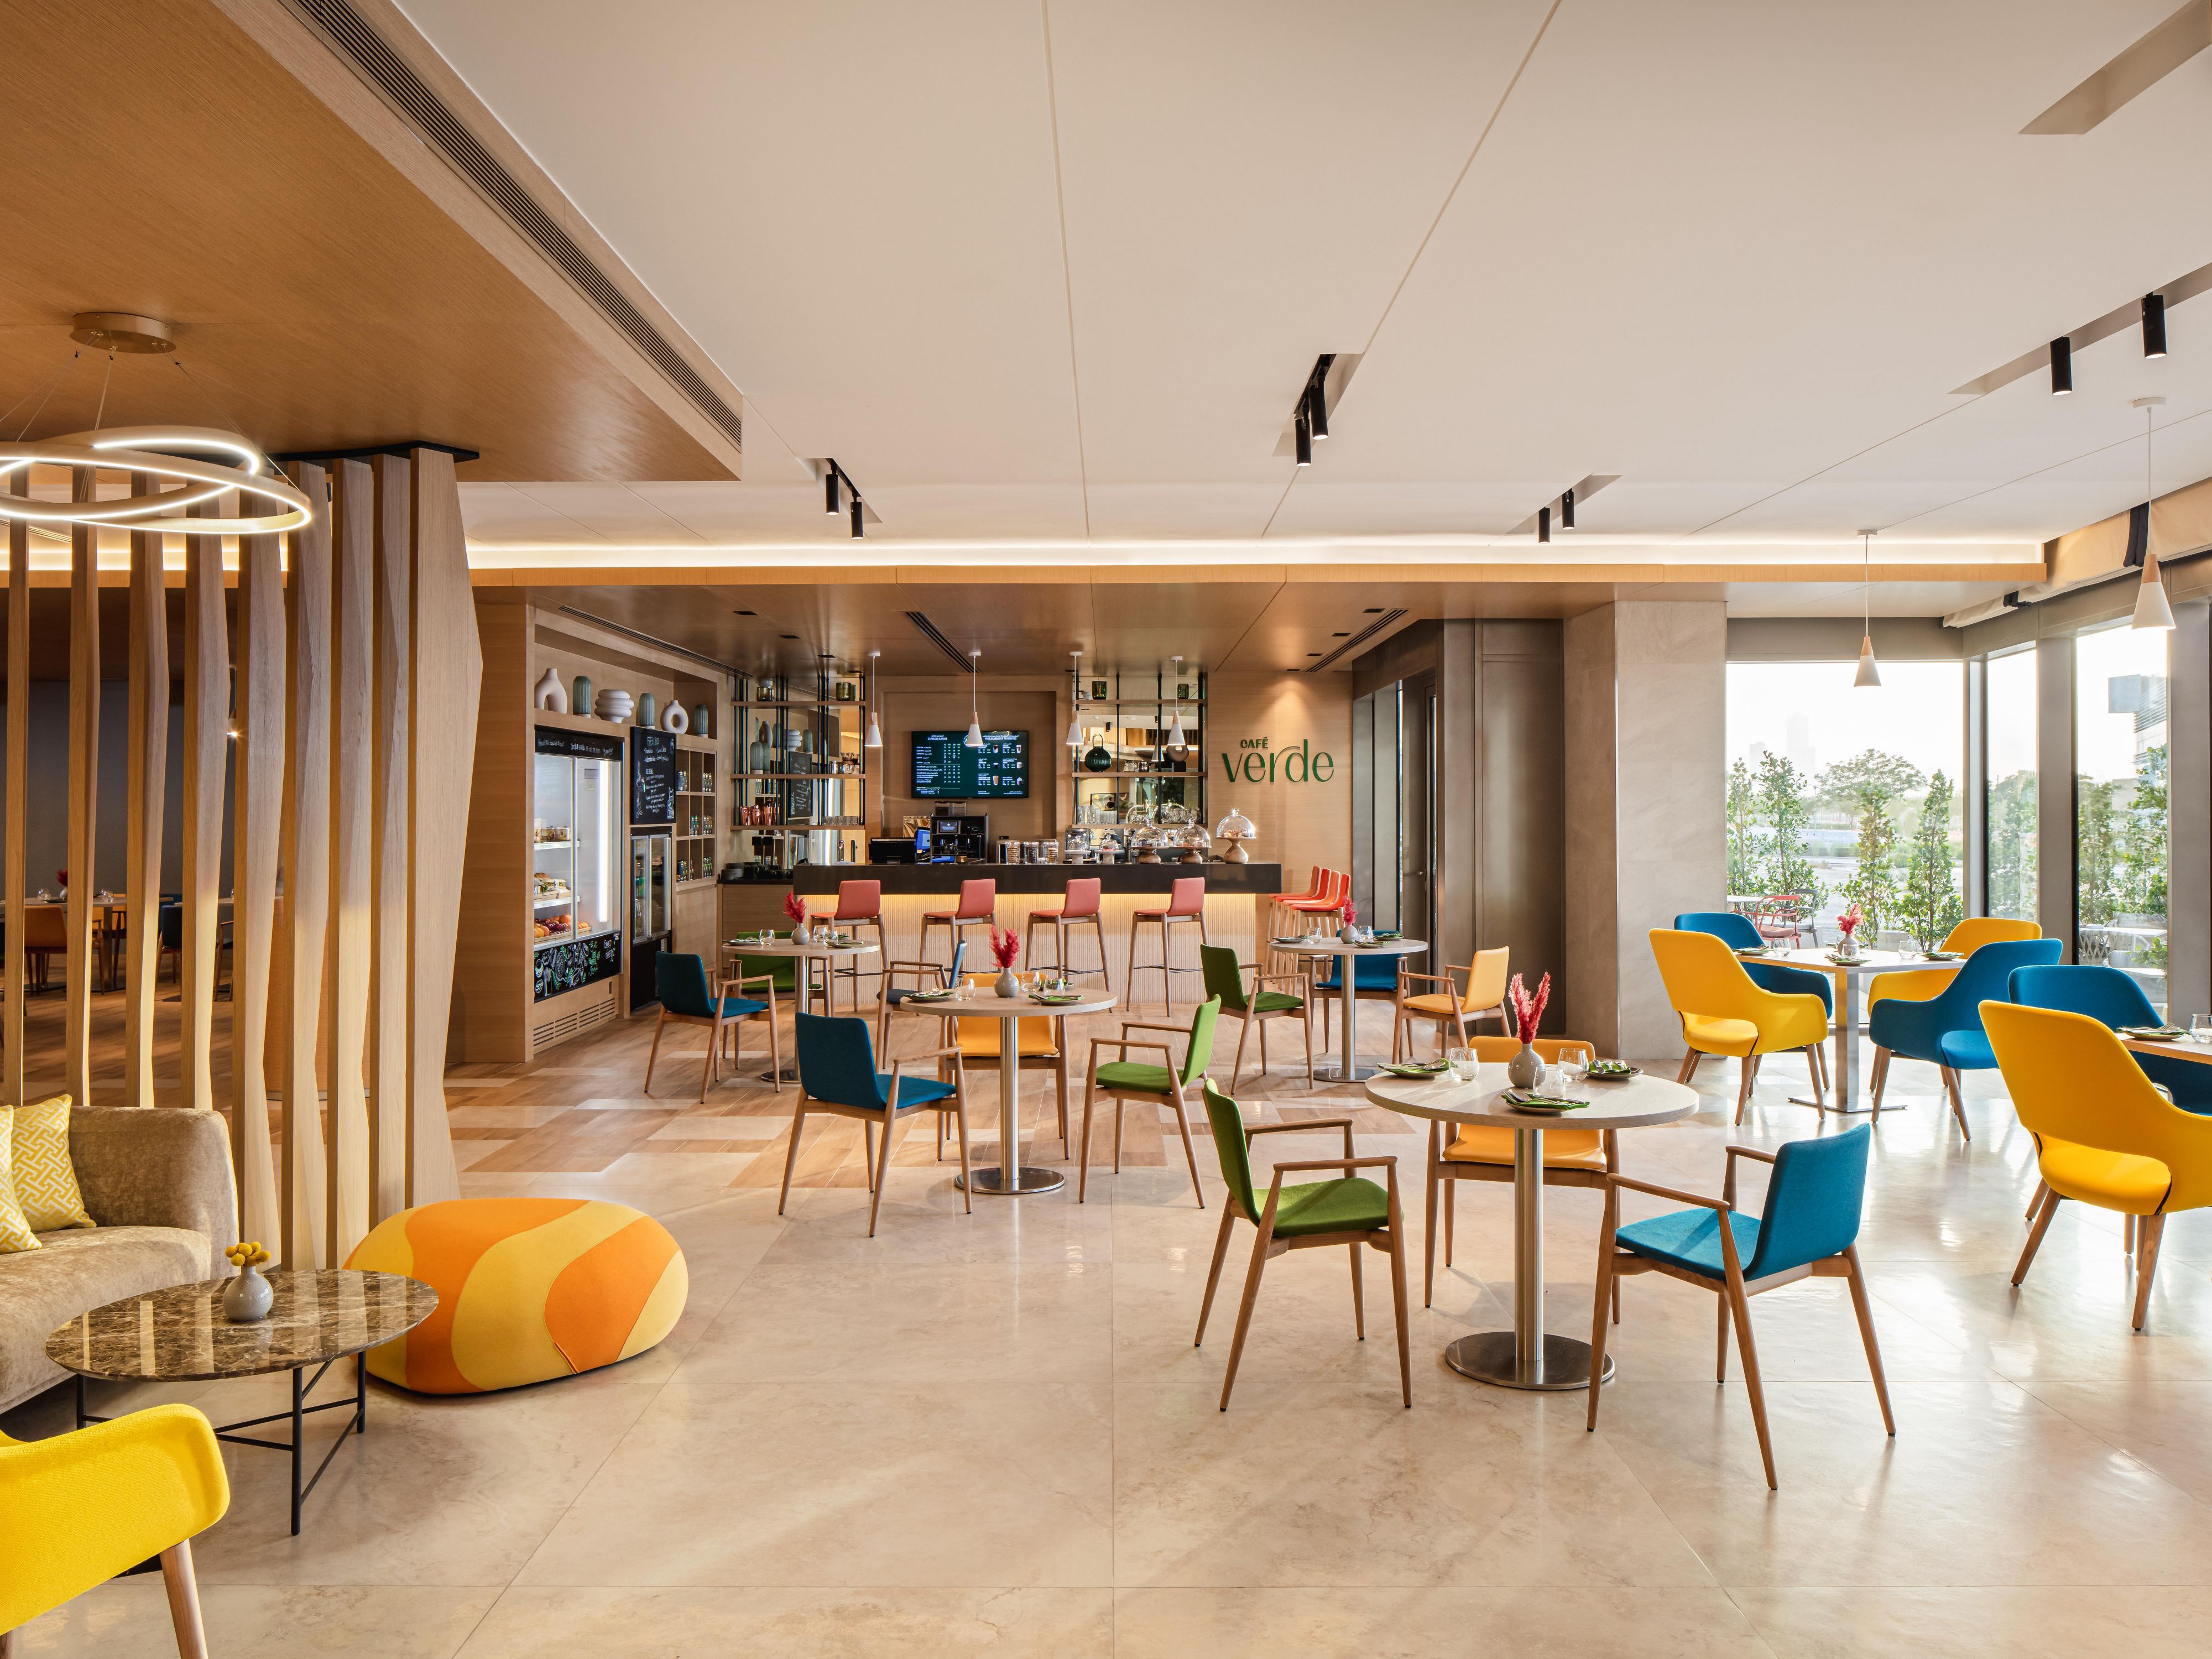 Discover Cafe Verde, a gourmet deli and cafe designed for relaxation and connection. Immerse yourself in the serene, green atmosphere and delight in the aroma of freshly roasted Starbucks coffee. Perfect for a quick break or leisurely indulgence.